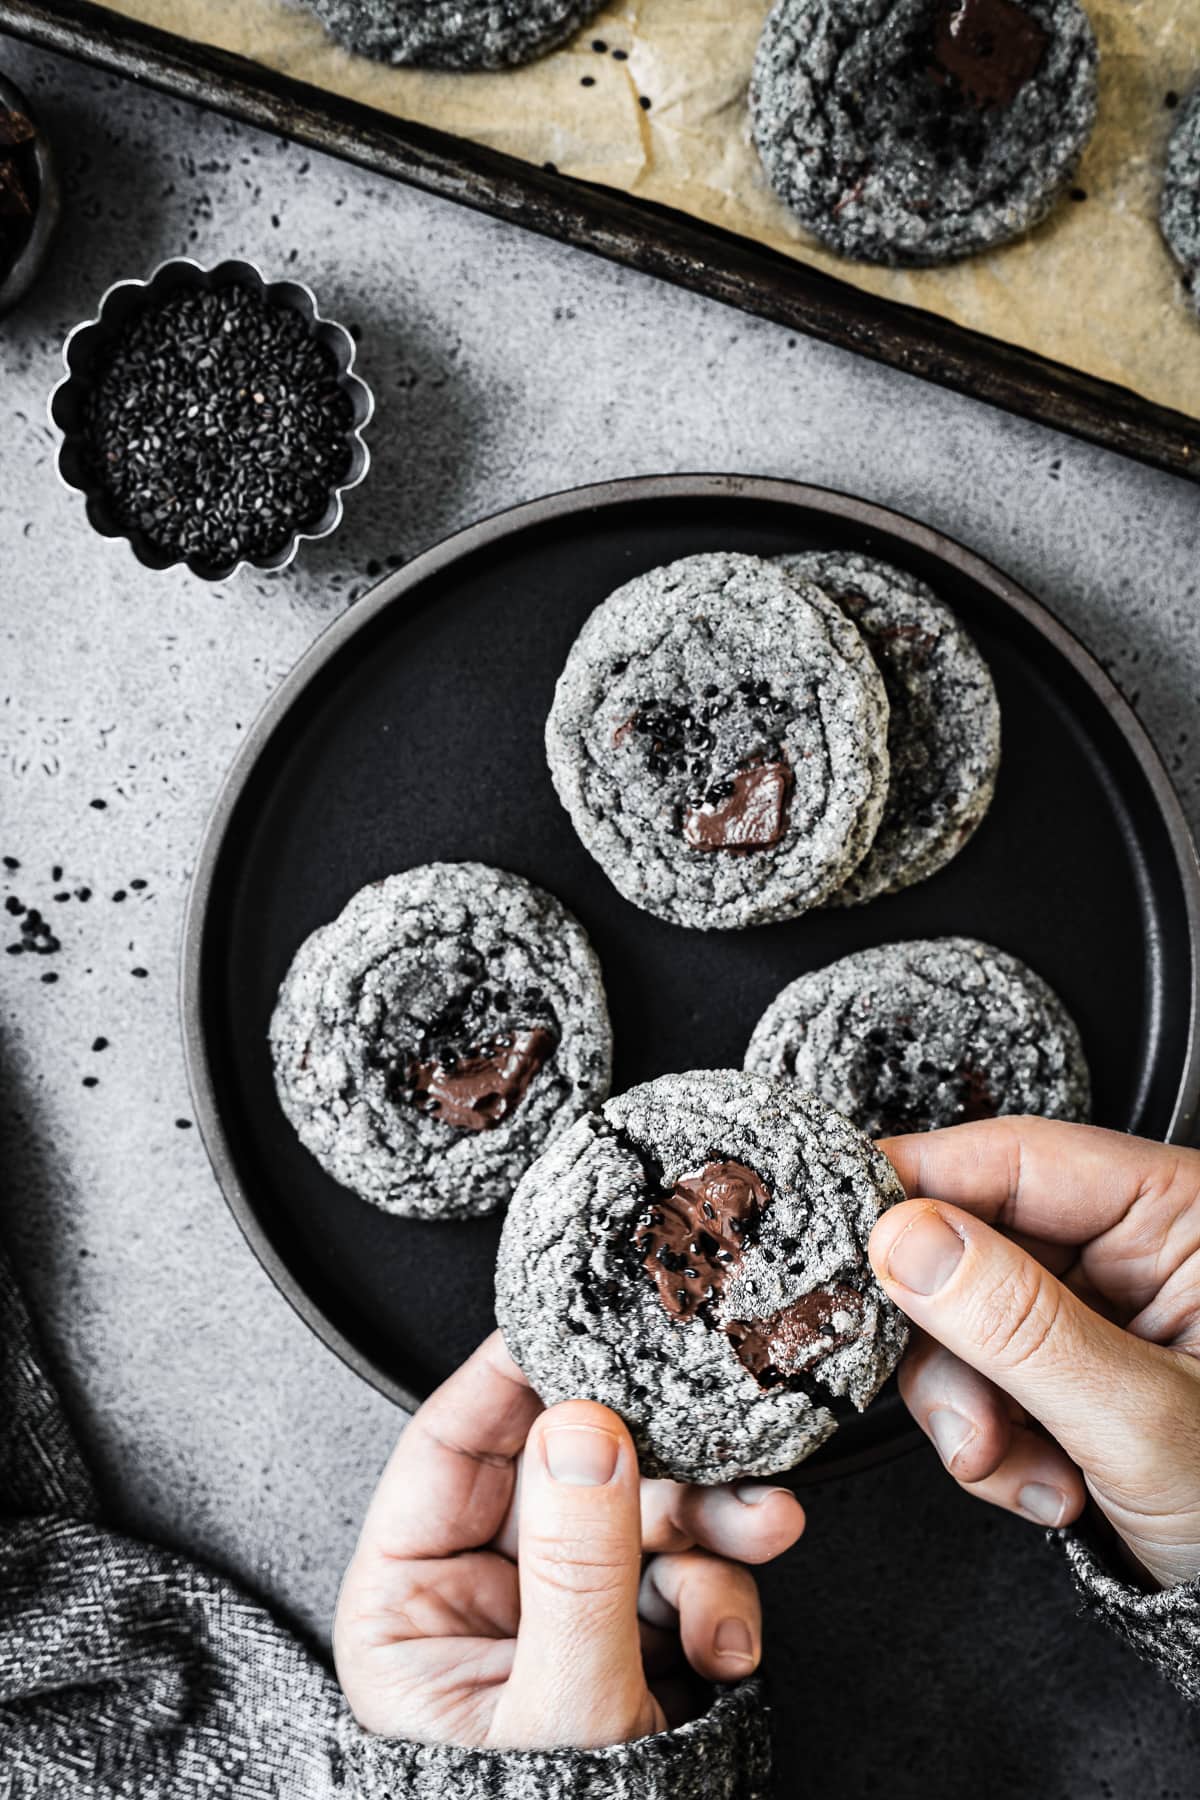 Hands hold a cookie which is being broken in half. There is a black plate full of cookies in the background on a grey stone surface. A small container of black sesame seeds sits nearby.